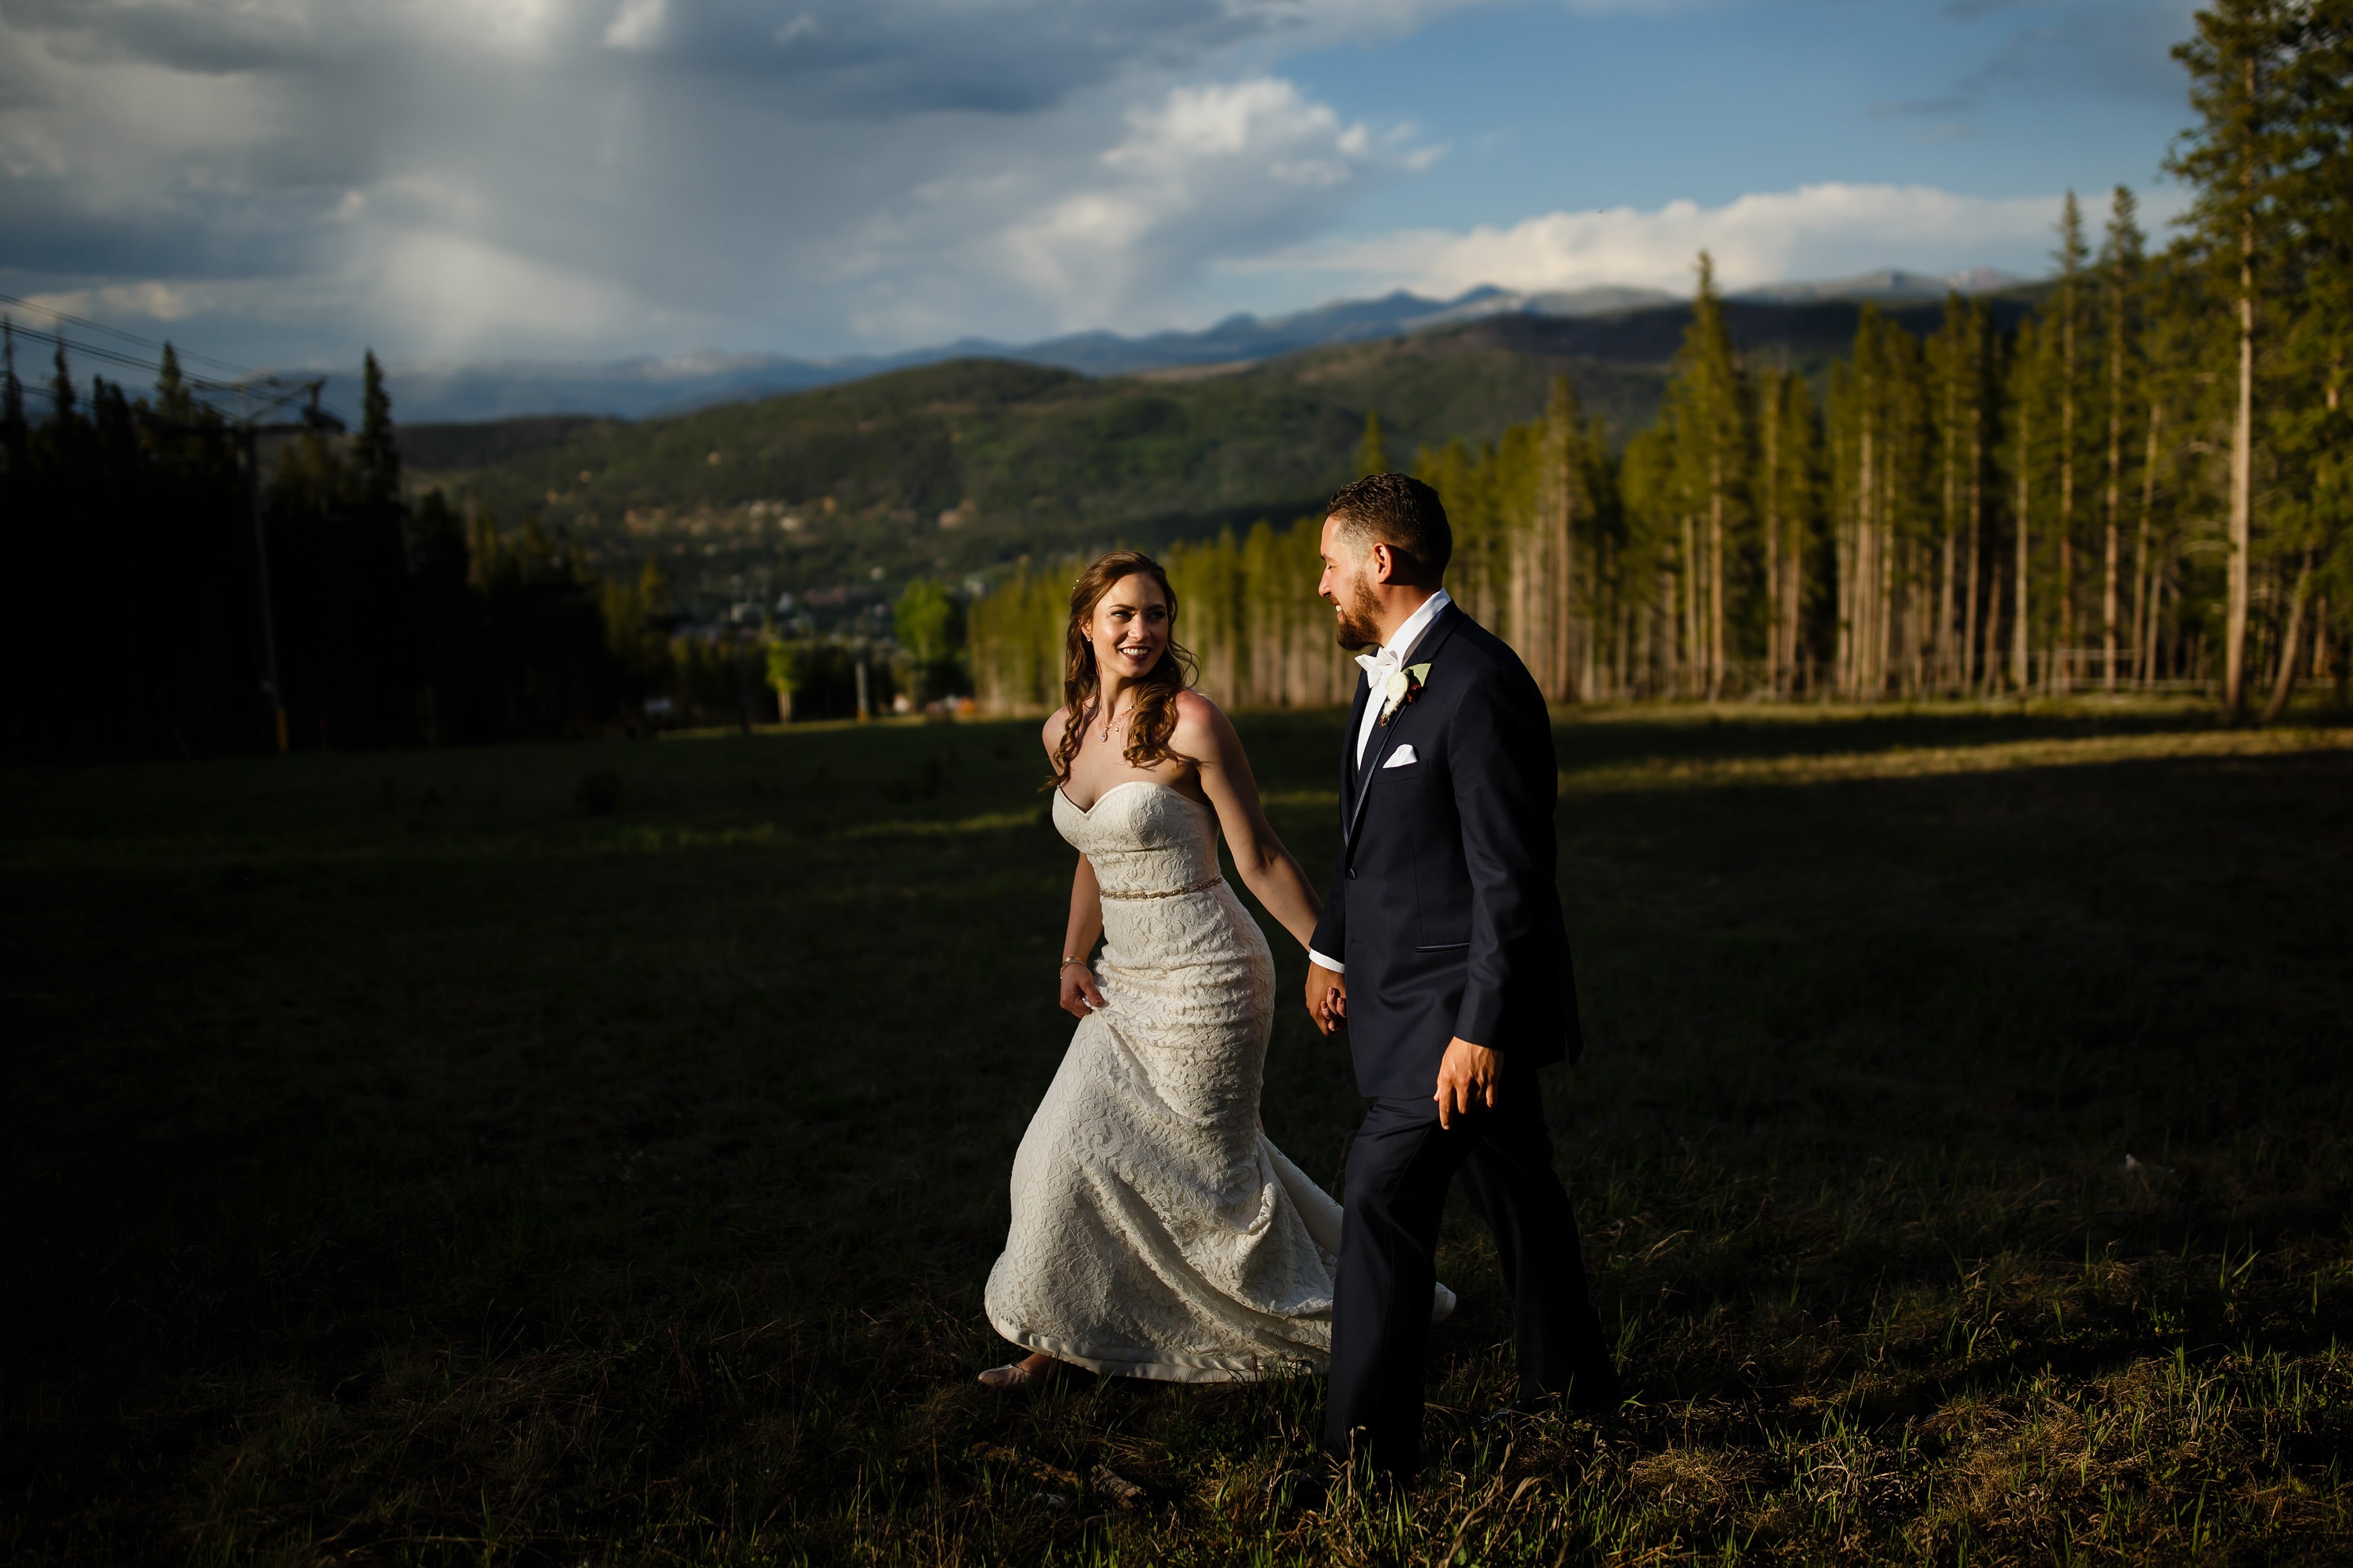 Sharon and Nick walk together on Peak 9 during their wedding at TenMIle Station on Breckenridge mountain